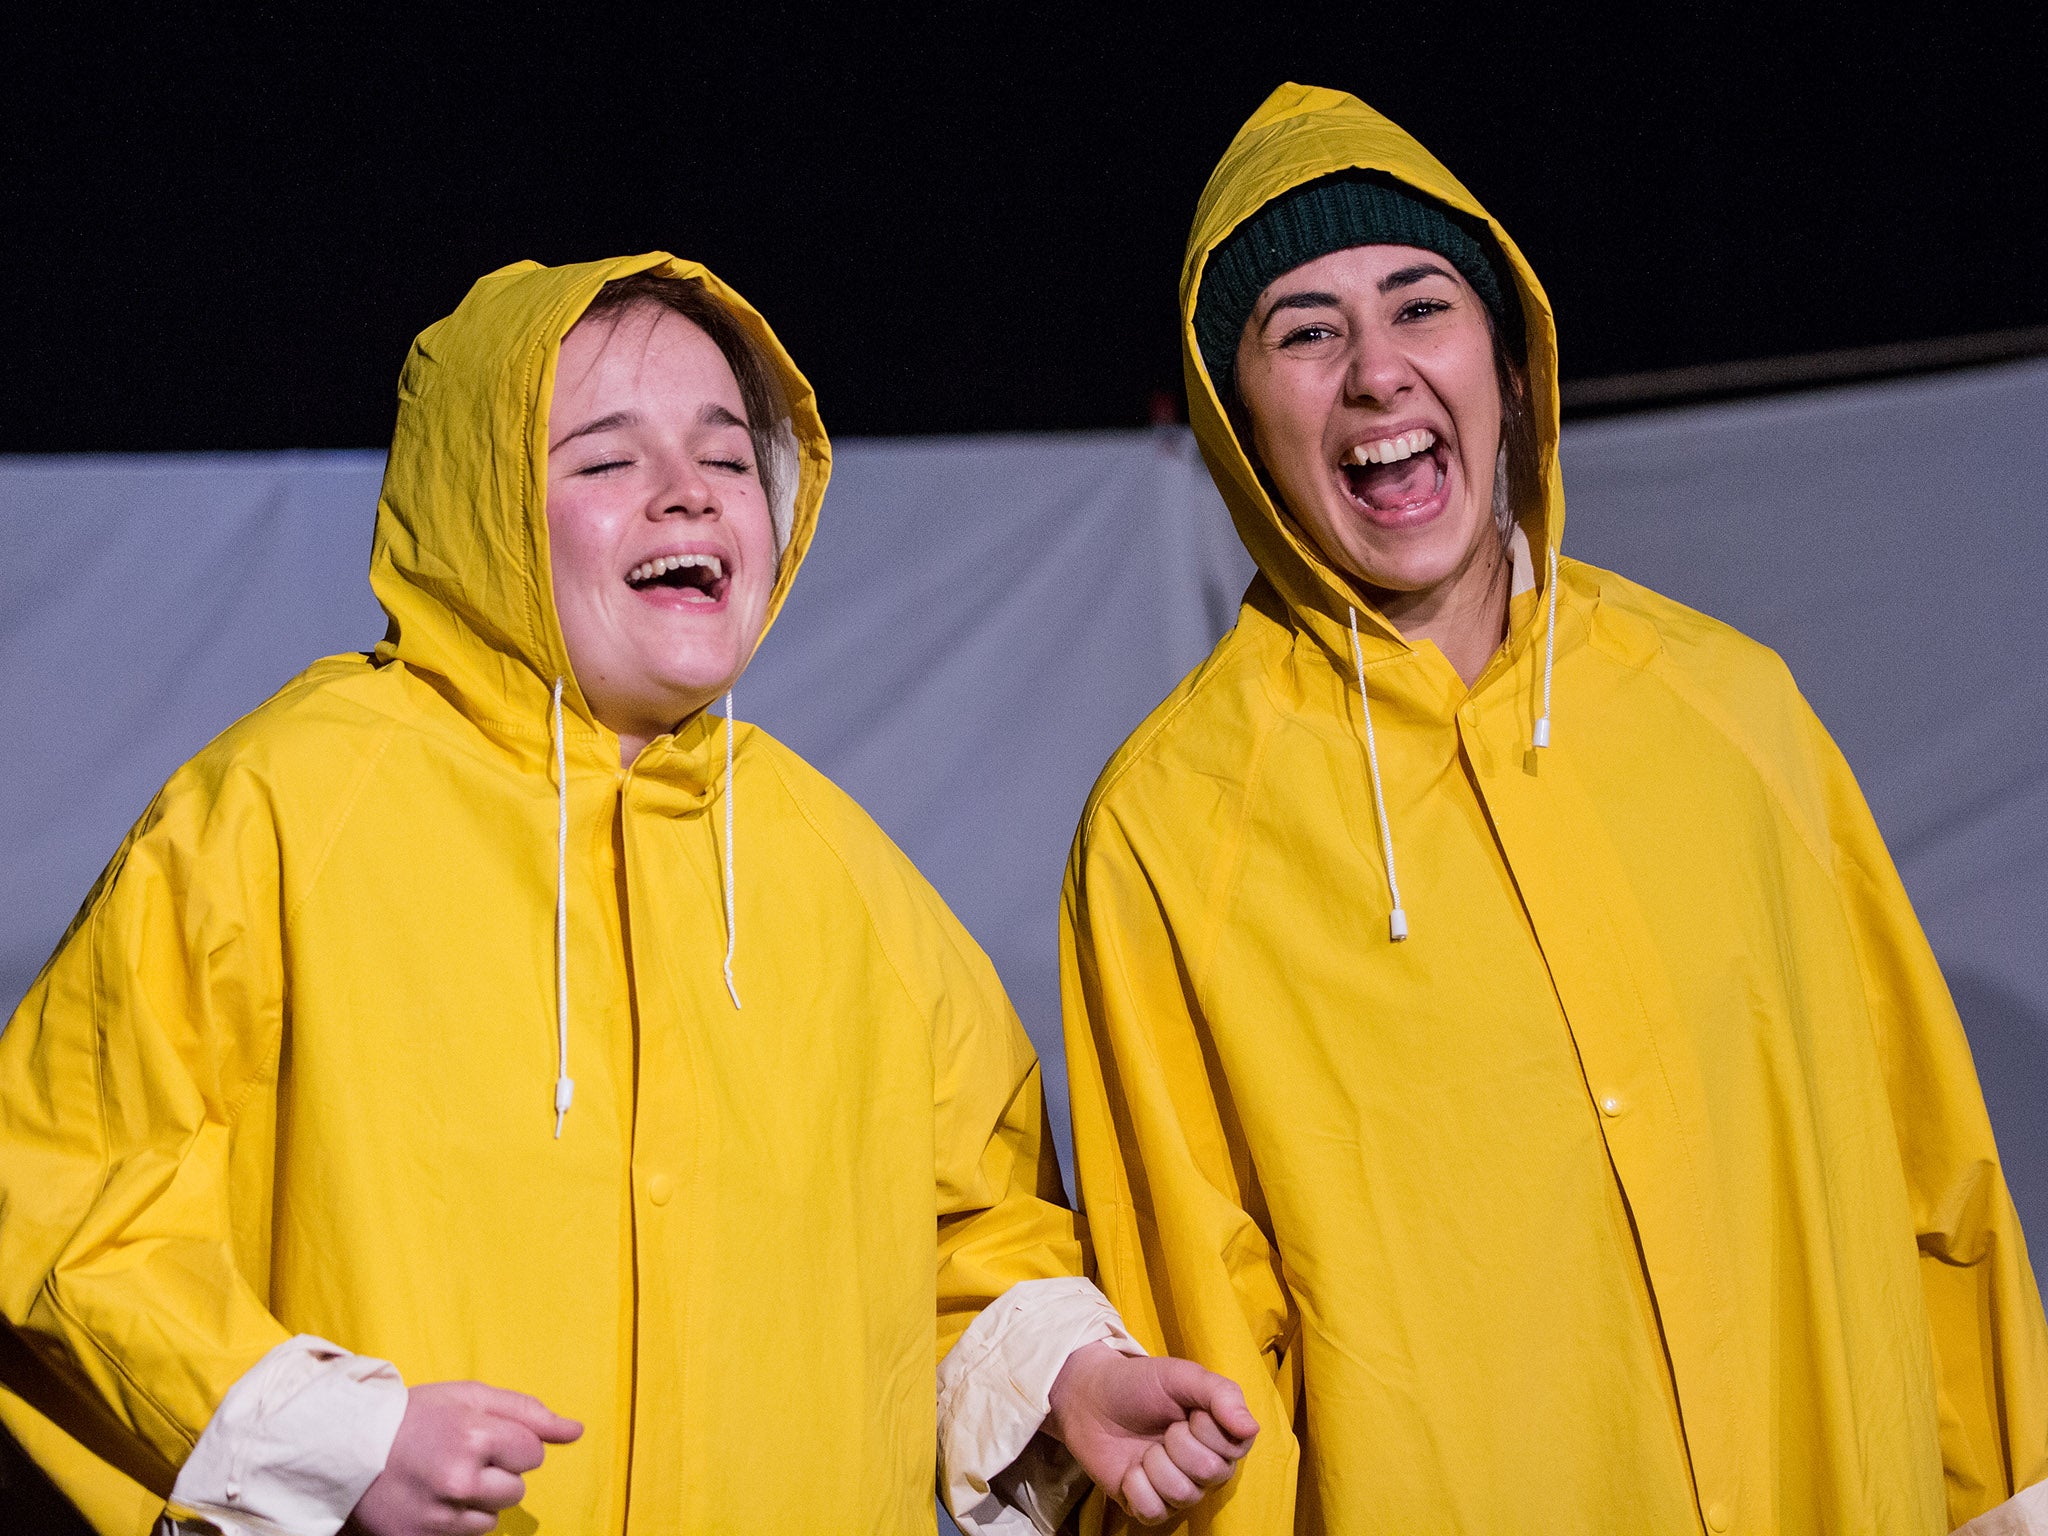 ‘A Clown Show About Rain’, a humorous exploration of the human psyche, is at venue 23, Pleasance Dome, at 13:40